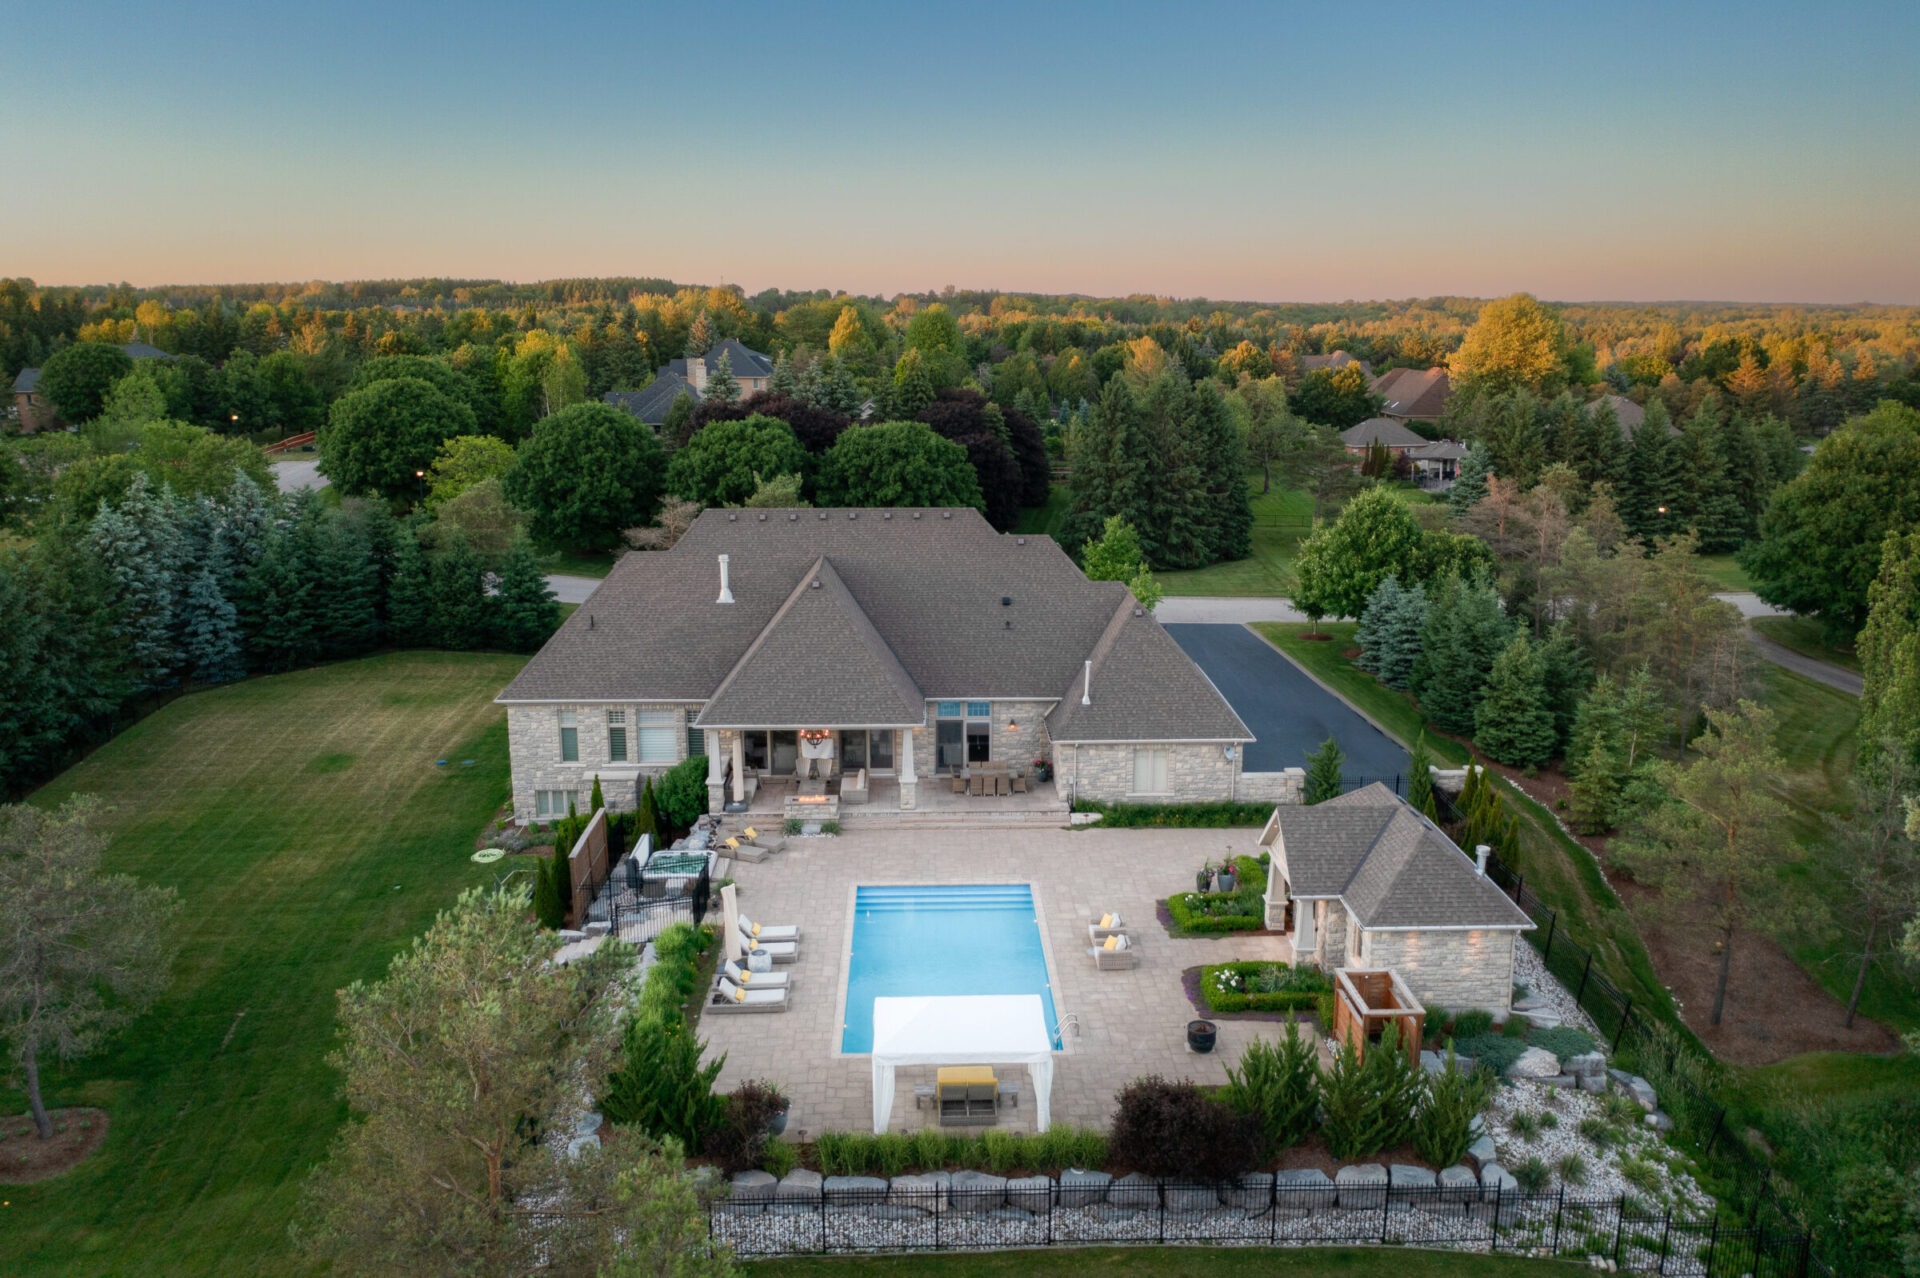 An aerial view shows a luxurious house with a large swimming pool, landscaped garden, and surrounding trees during twilight. No people are visible.